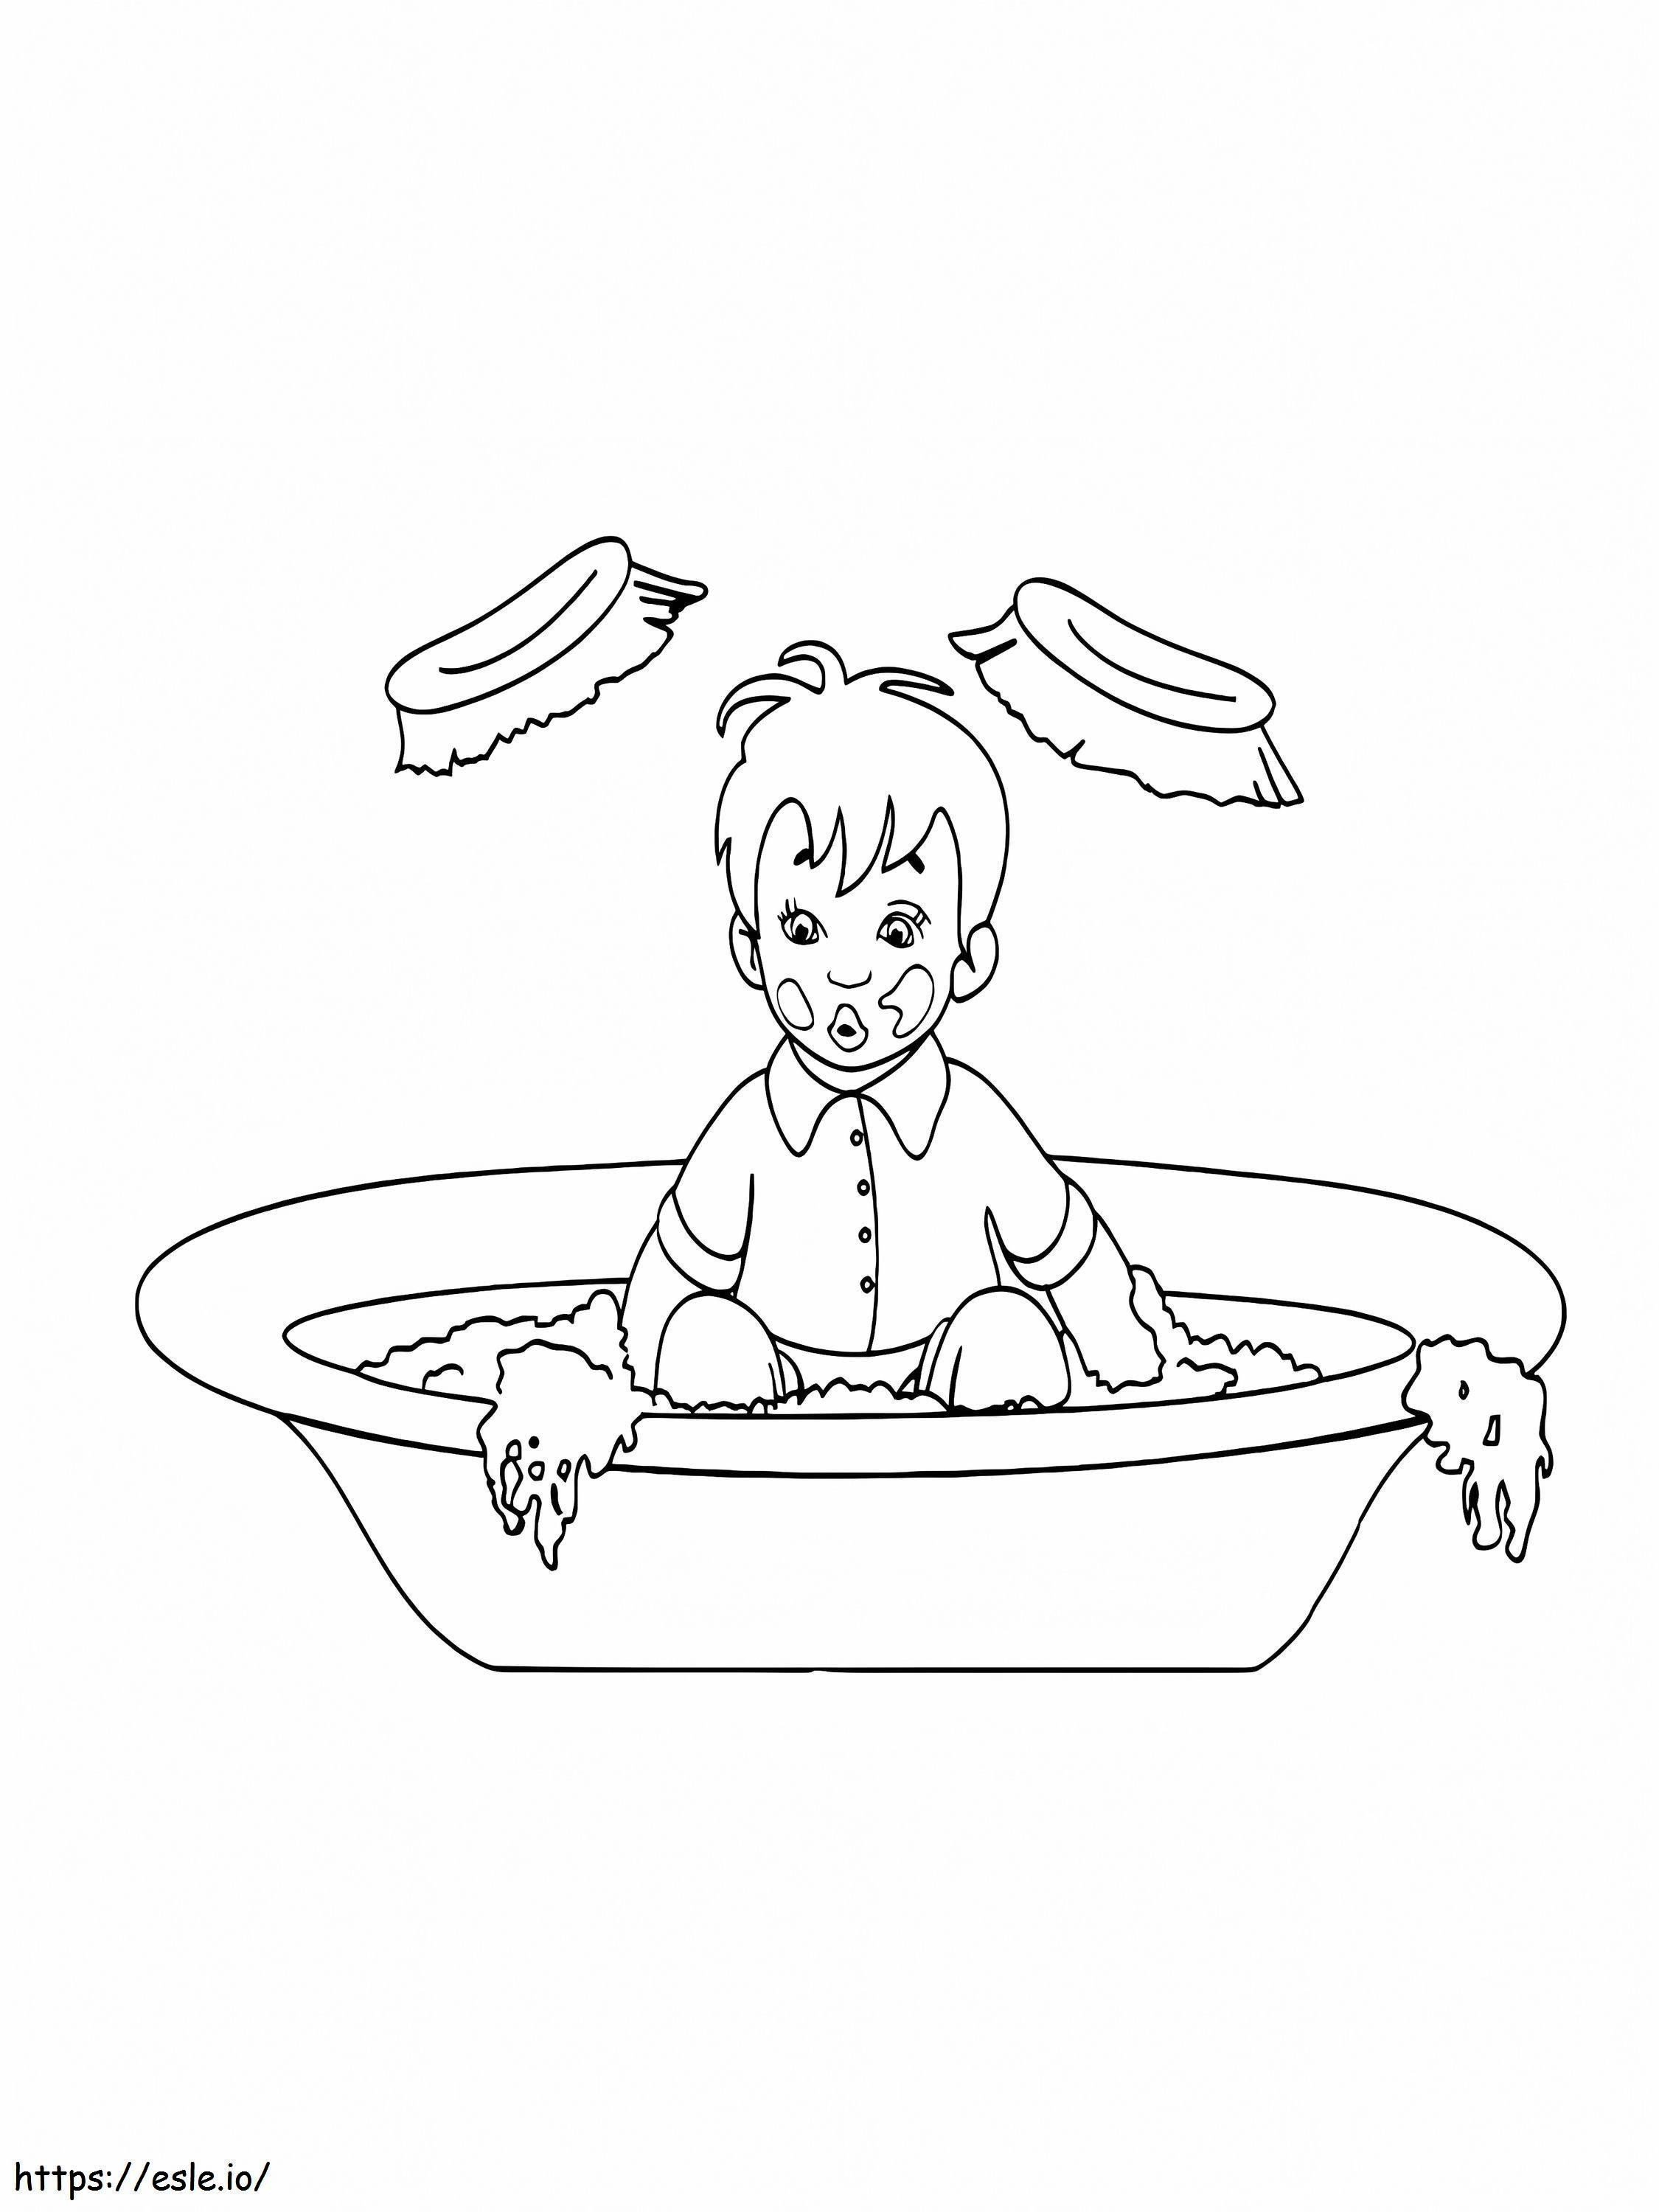 Free Printable Good Hygiene coloring page